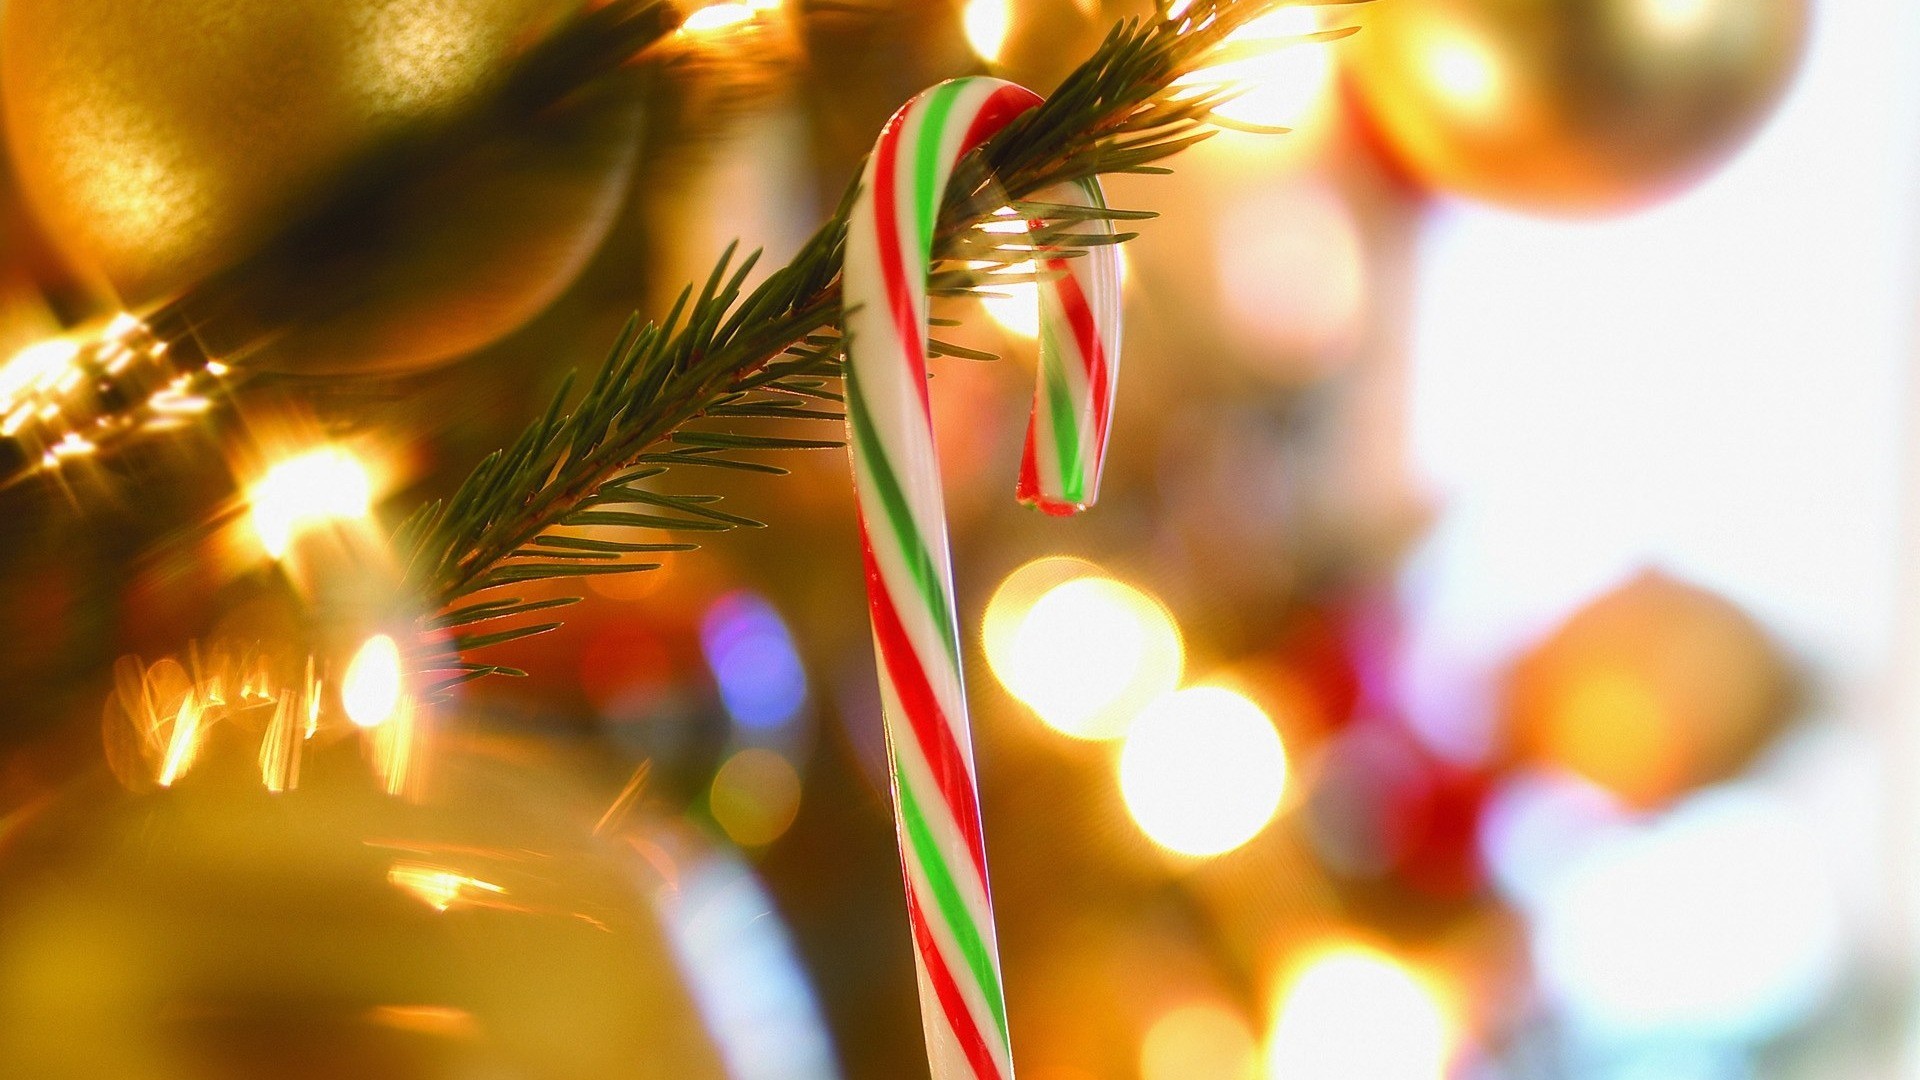 1920x1080 Lovely Candy Cane Wallpaper 38142